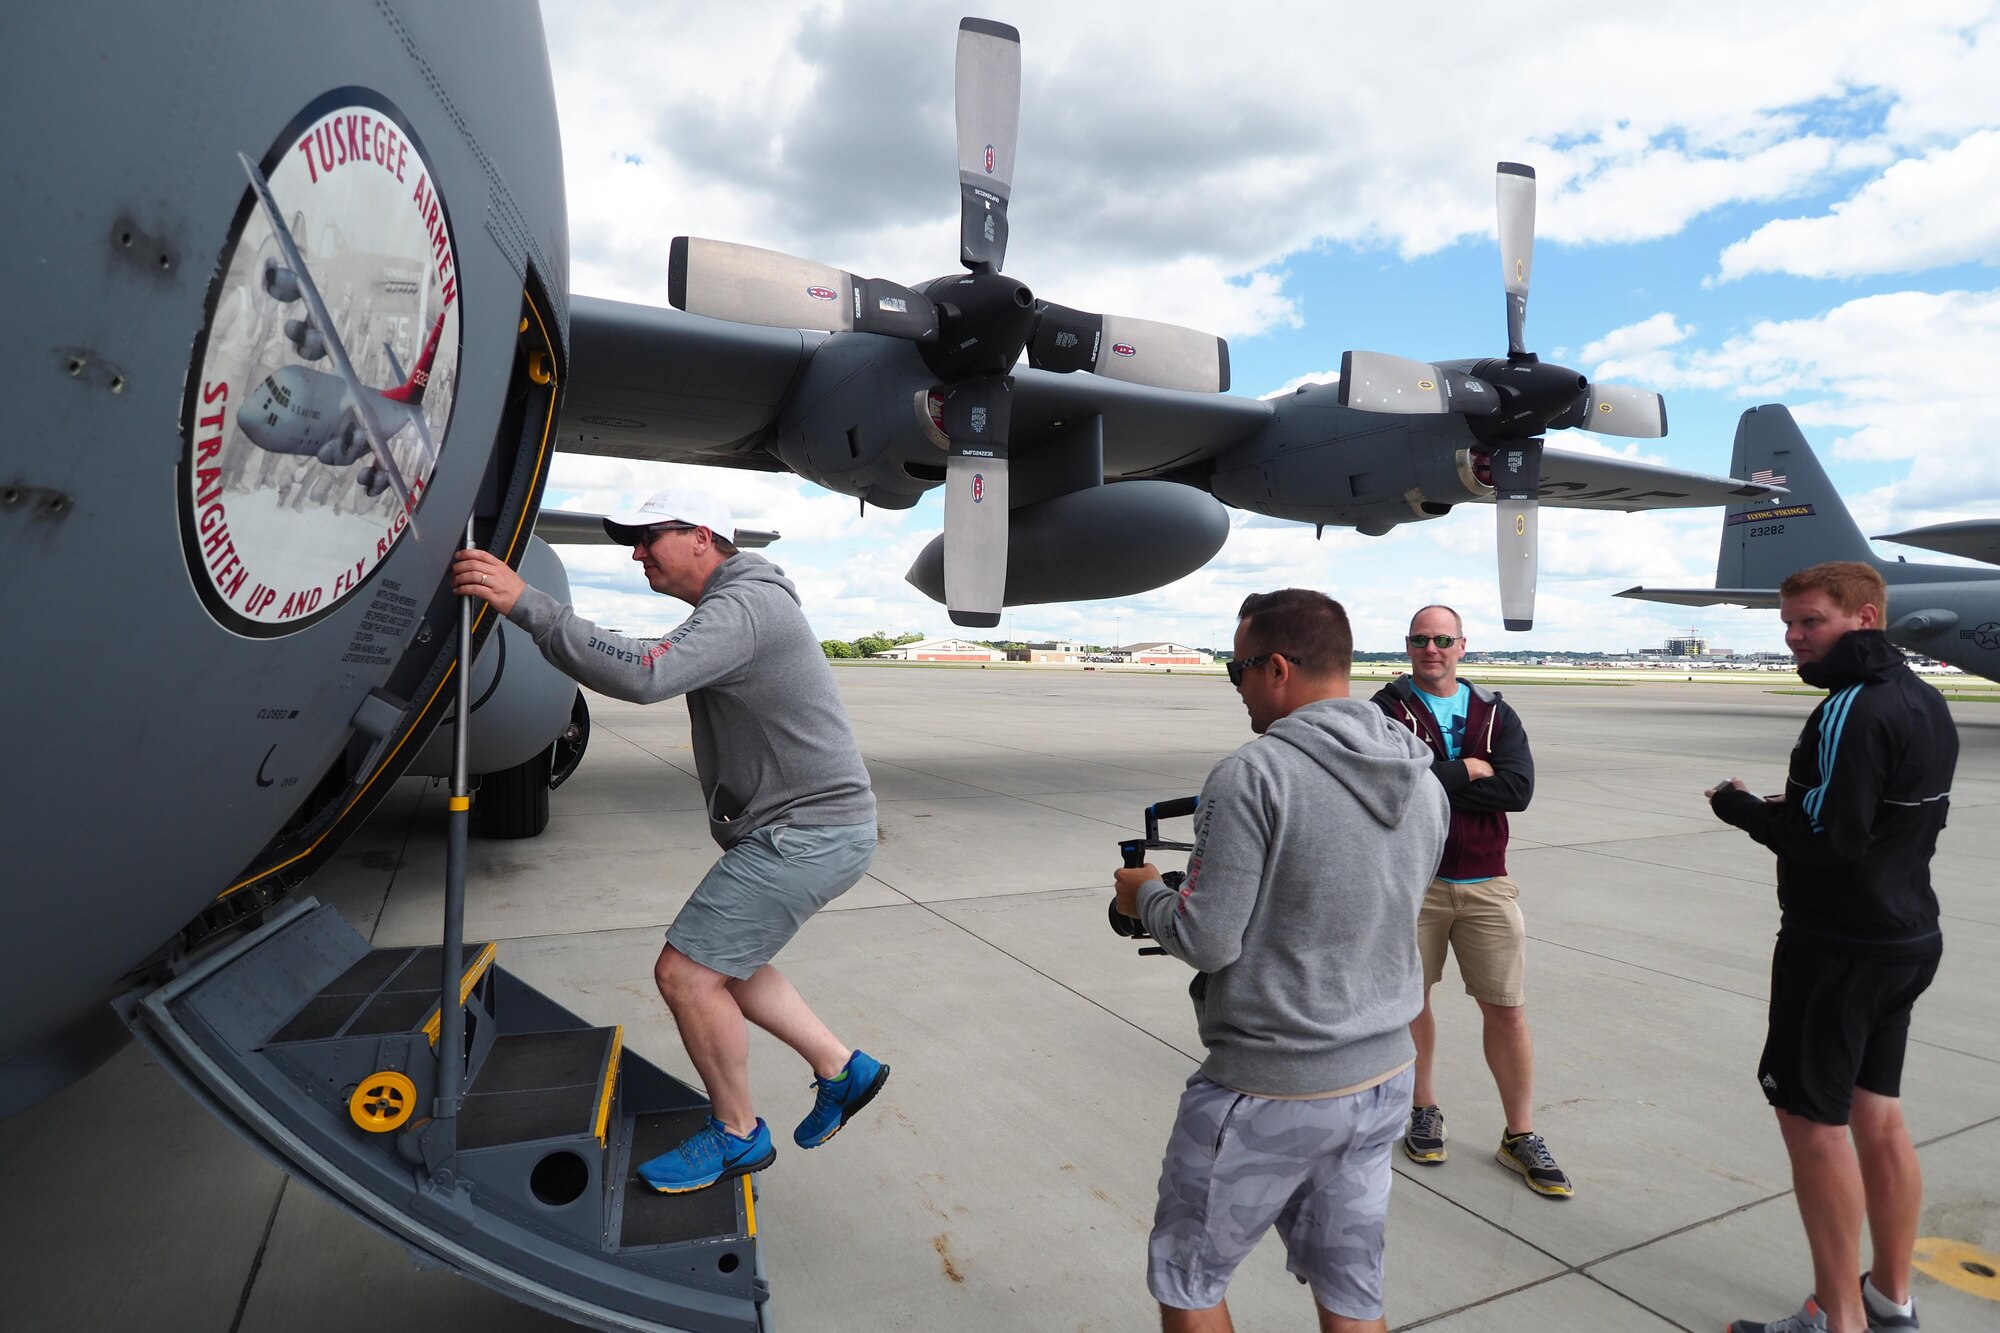 Members of the Minnesota United F.C. toured a 934th Airlift Wing C-130 June 25 after sponsoring participating in a Military Youth Soccer Clinic at the Minneapolis-St. Paul Air Reserve Station. (Photo by Paul Zadach)